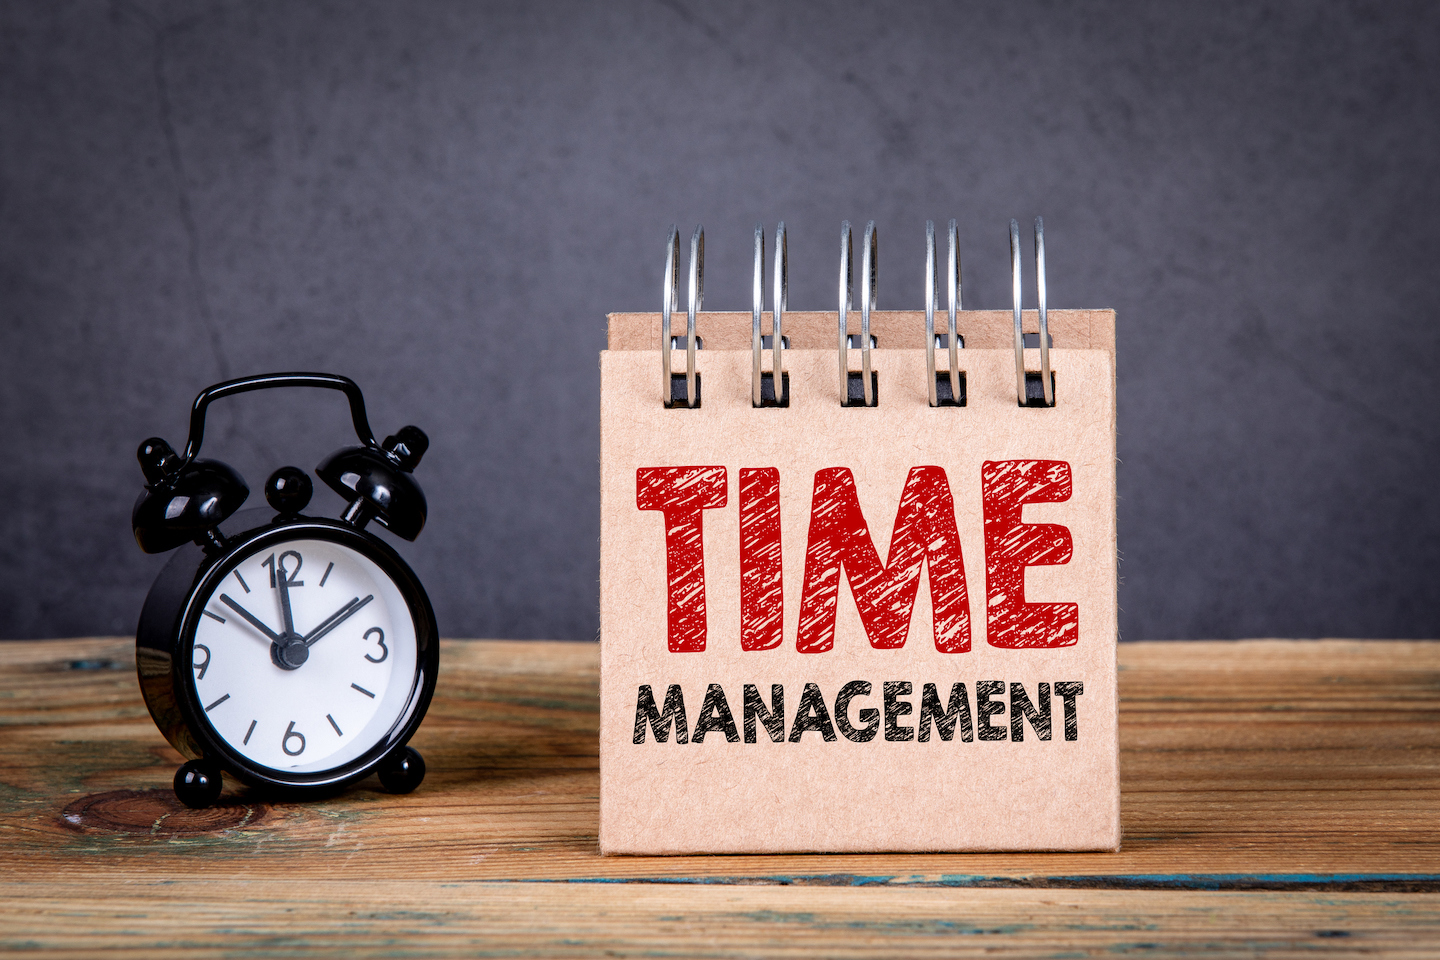 To Improve Your Time Management Skills, Do These 4 Things